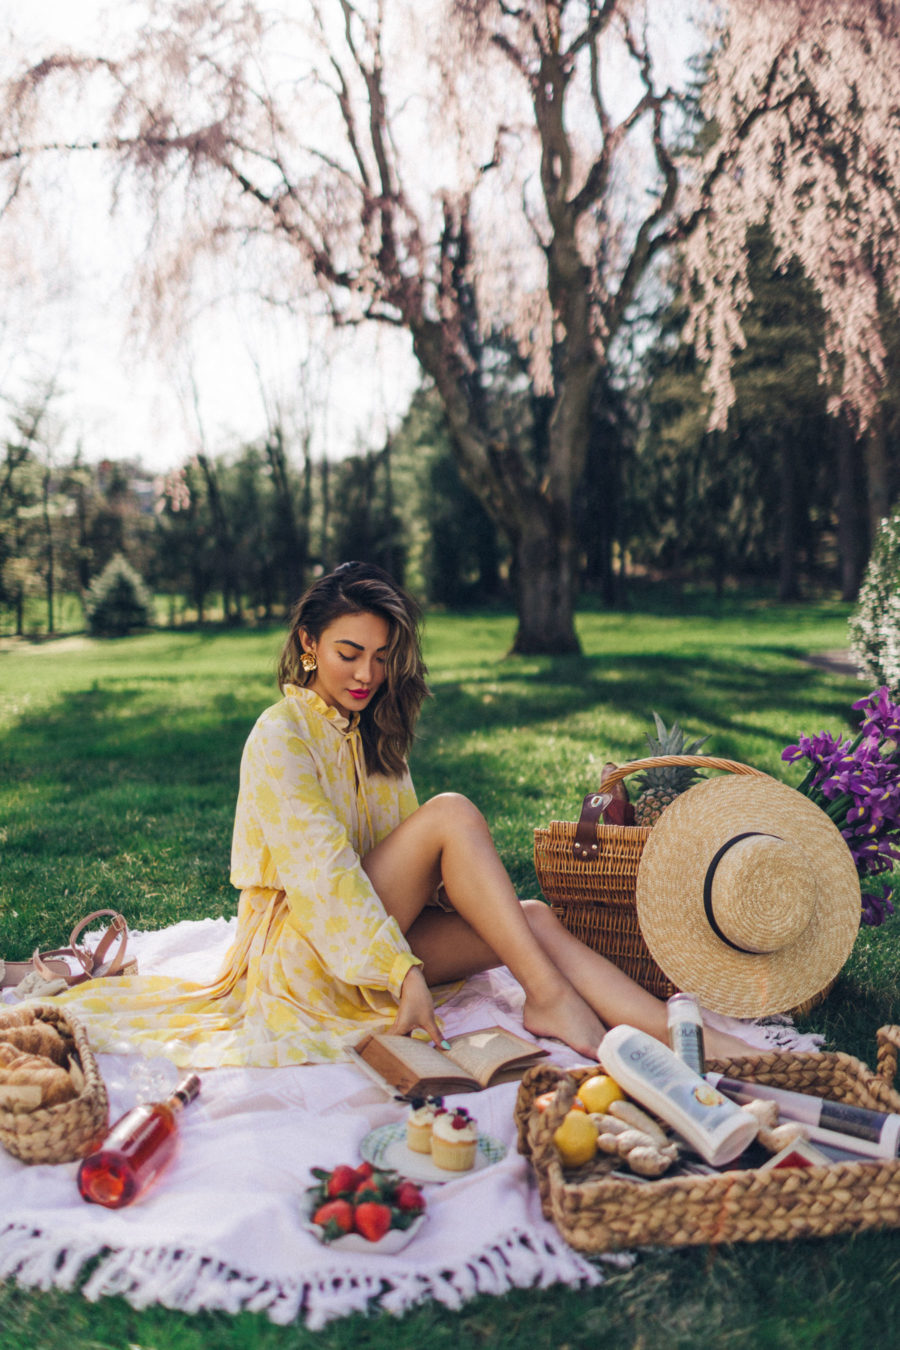 5 Perfect Summer Outfits for Every Activity - yellow sundress, flowy summer dress, straw tote, straw hat // Notjessfashion.com